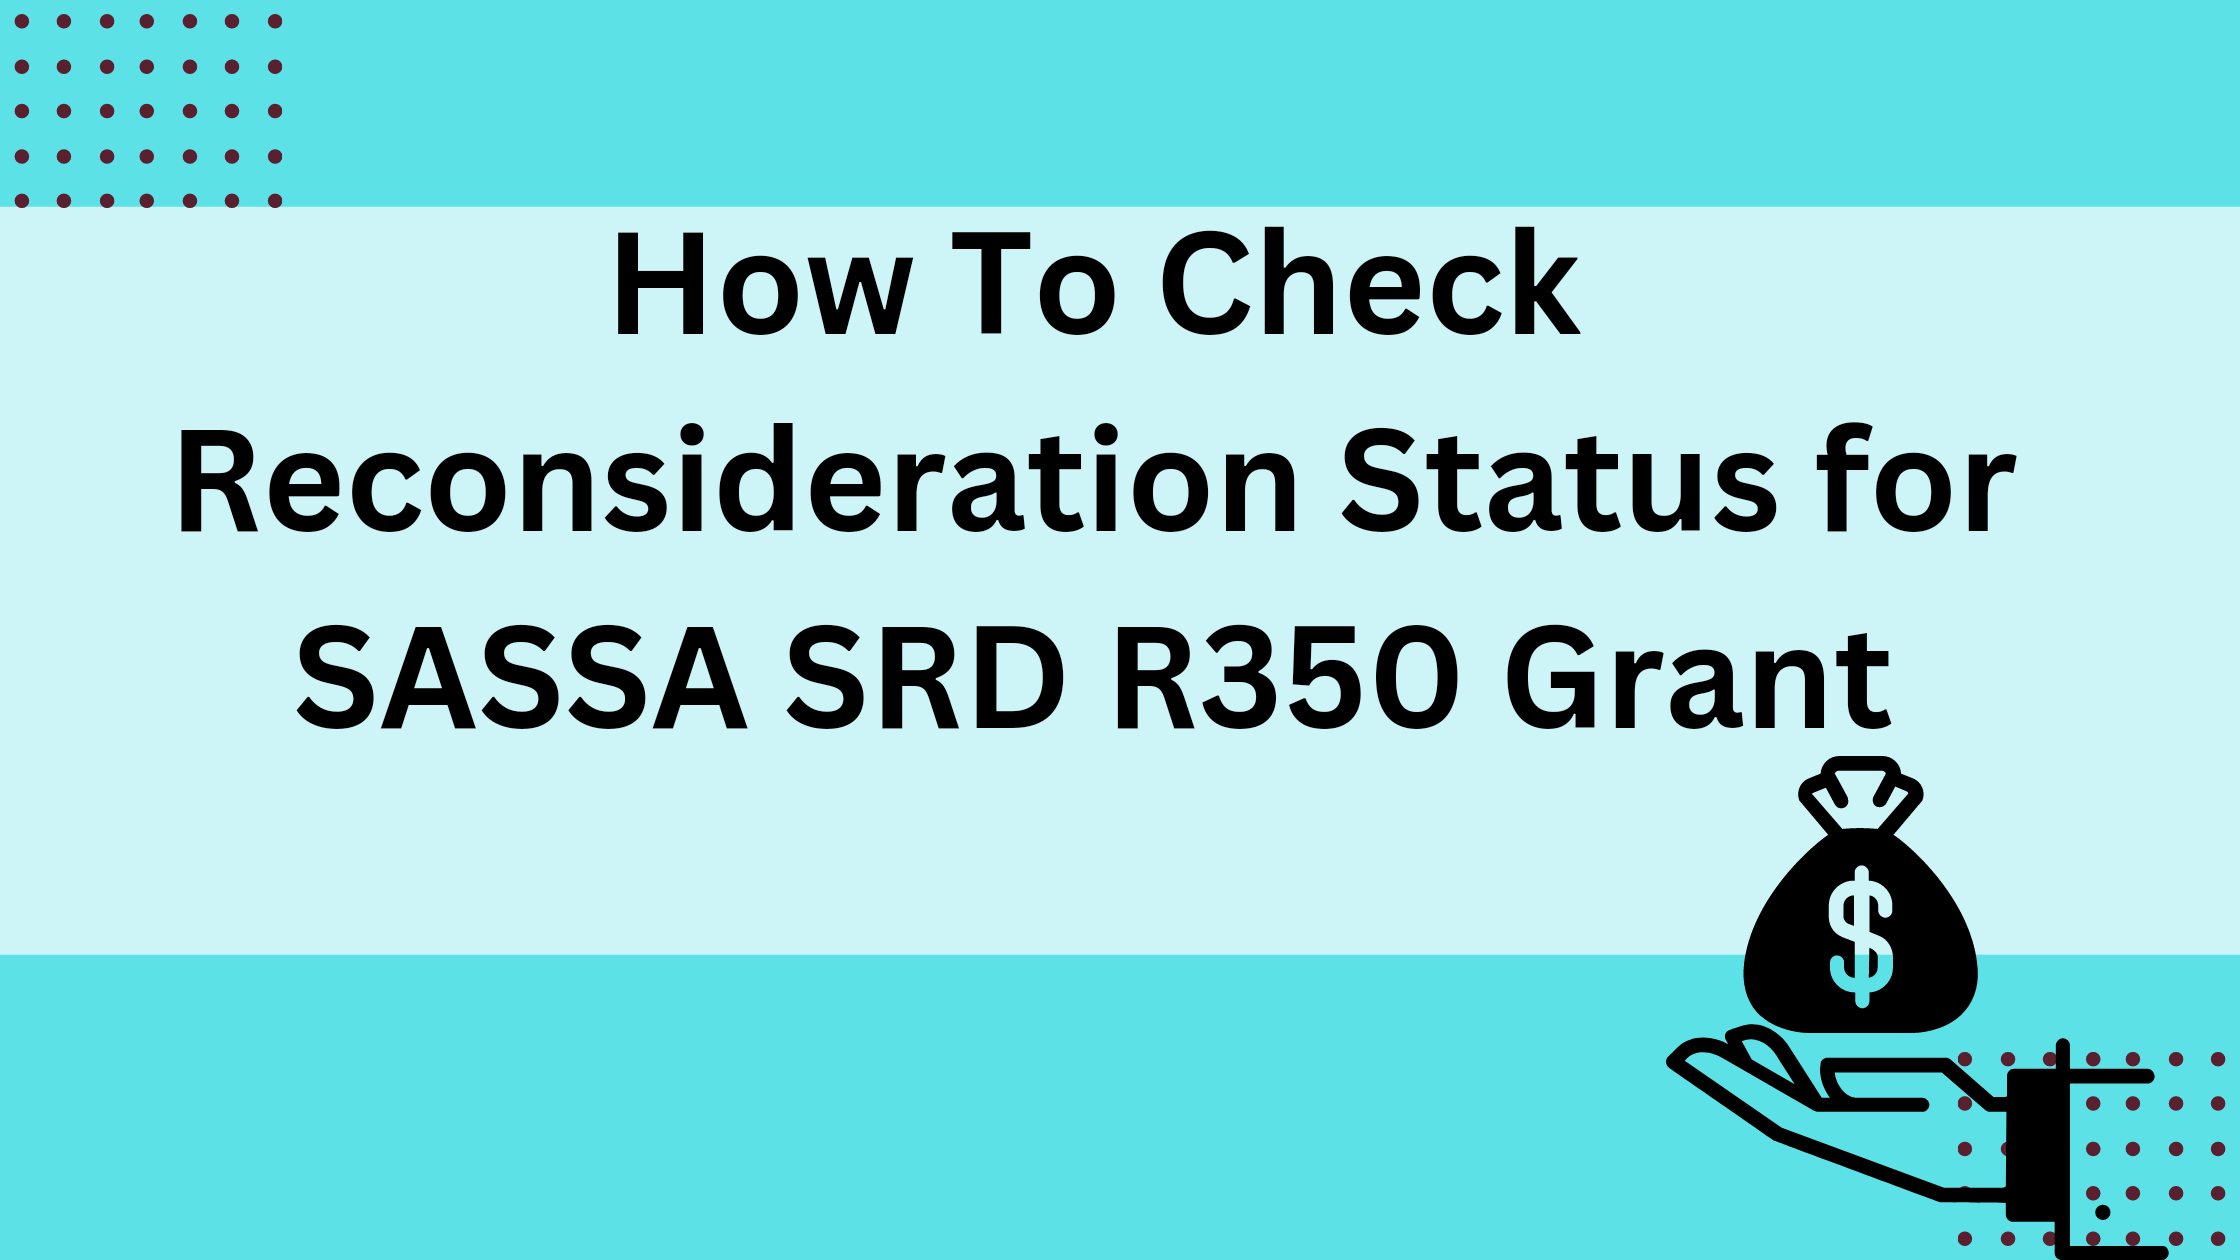 How To Check Reconsideration Status for SASSA SRD R350 Grant